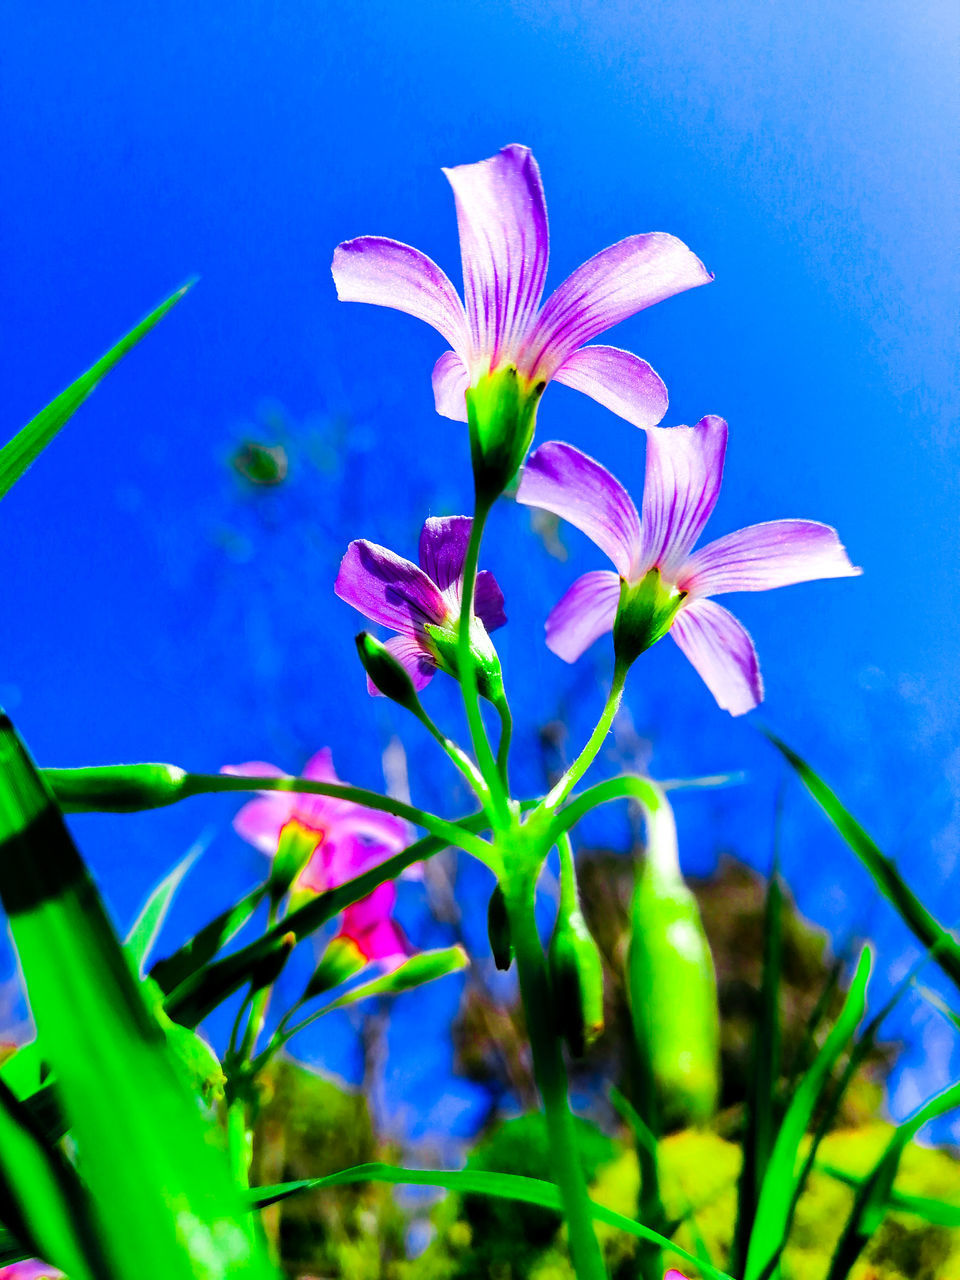 CLOSE-UP OF FLOWERING PLANT AGAINST BLUE SKY